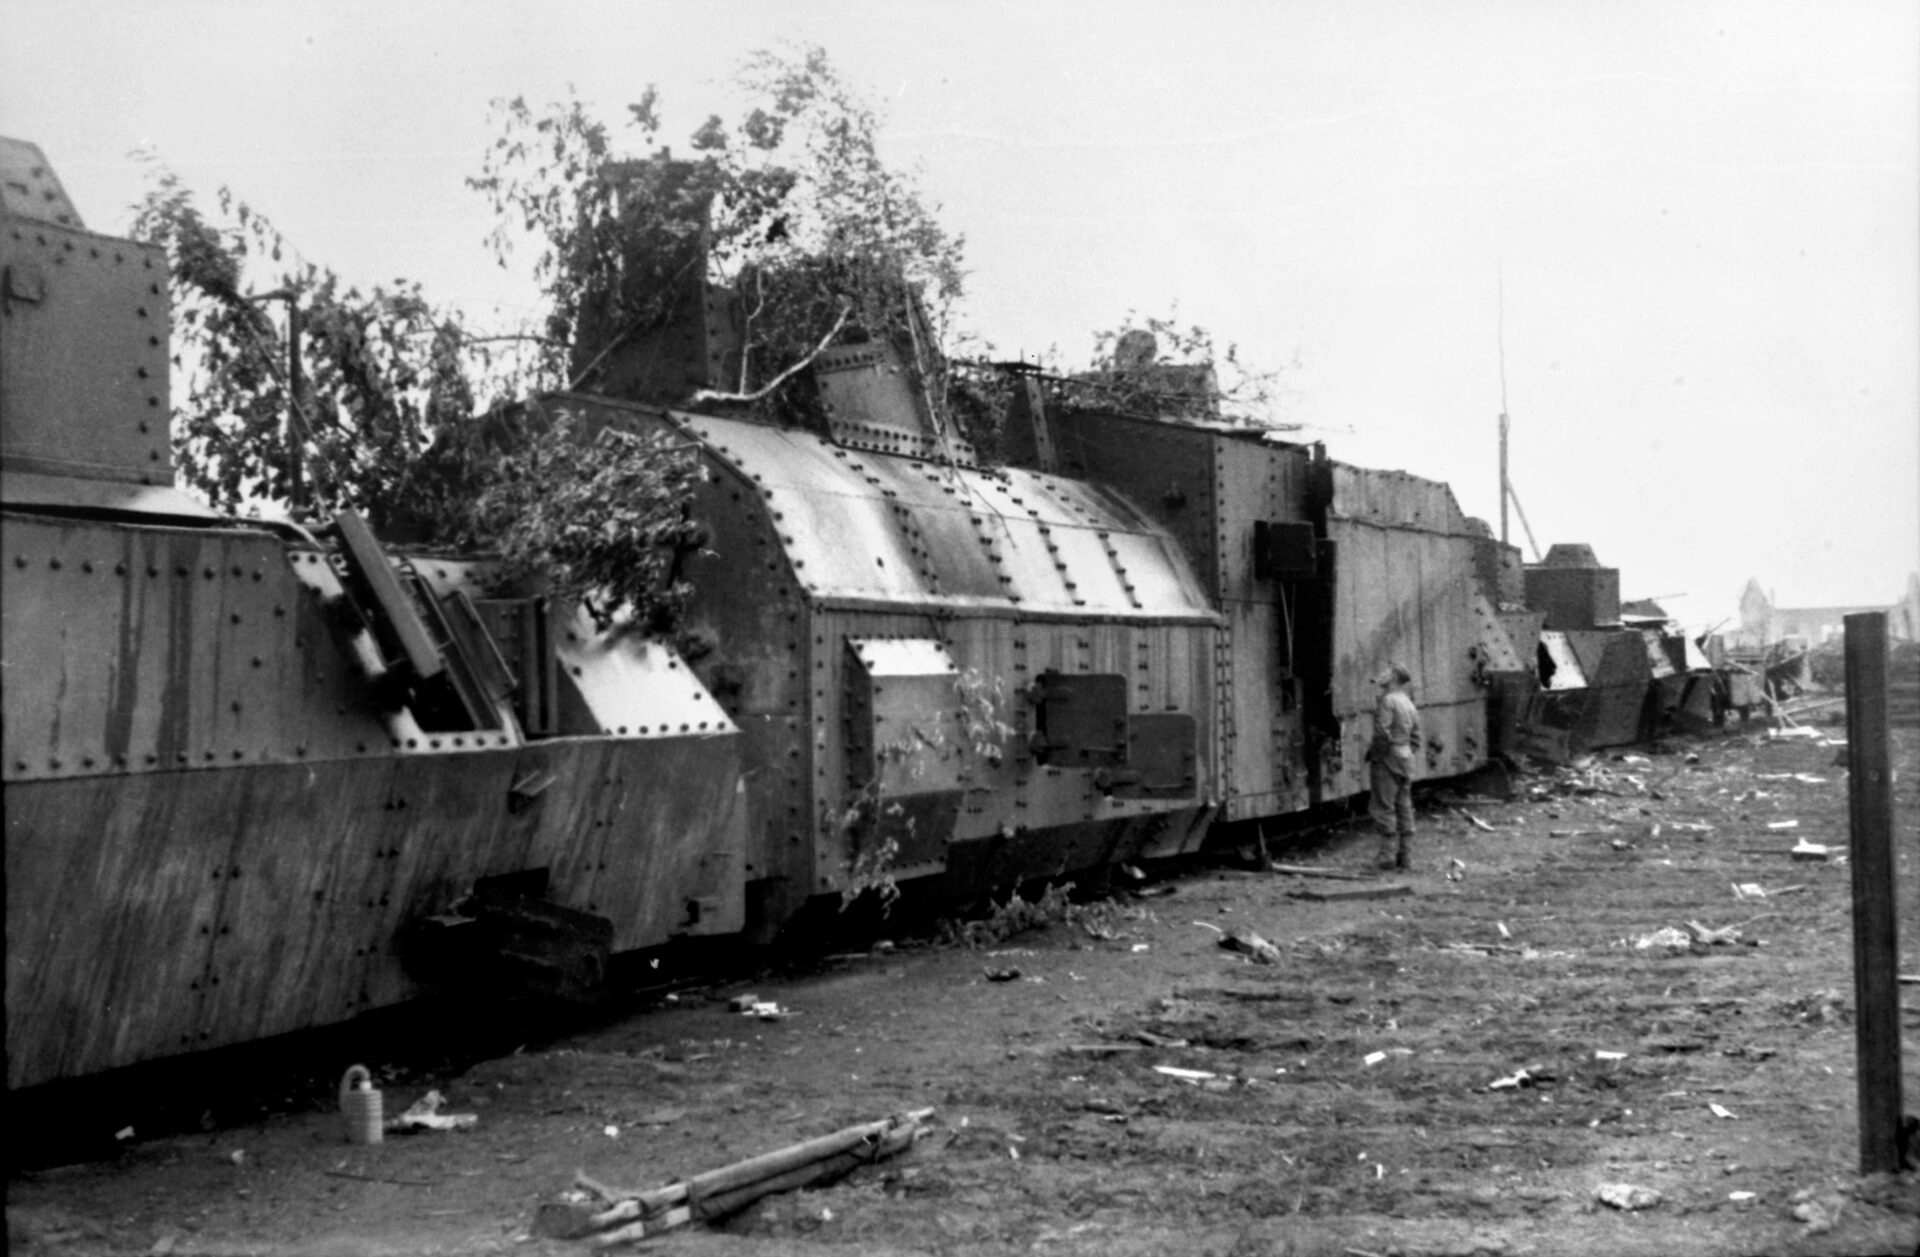 This Soviet armored train has been stopped in its tracks by German fire during the Wehrmacht advance. The summer of 1942 was one of renewed optimism for some German generals; however, the situation soon deteriorated amid stiffening Soviet resistance.